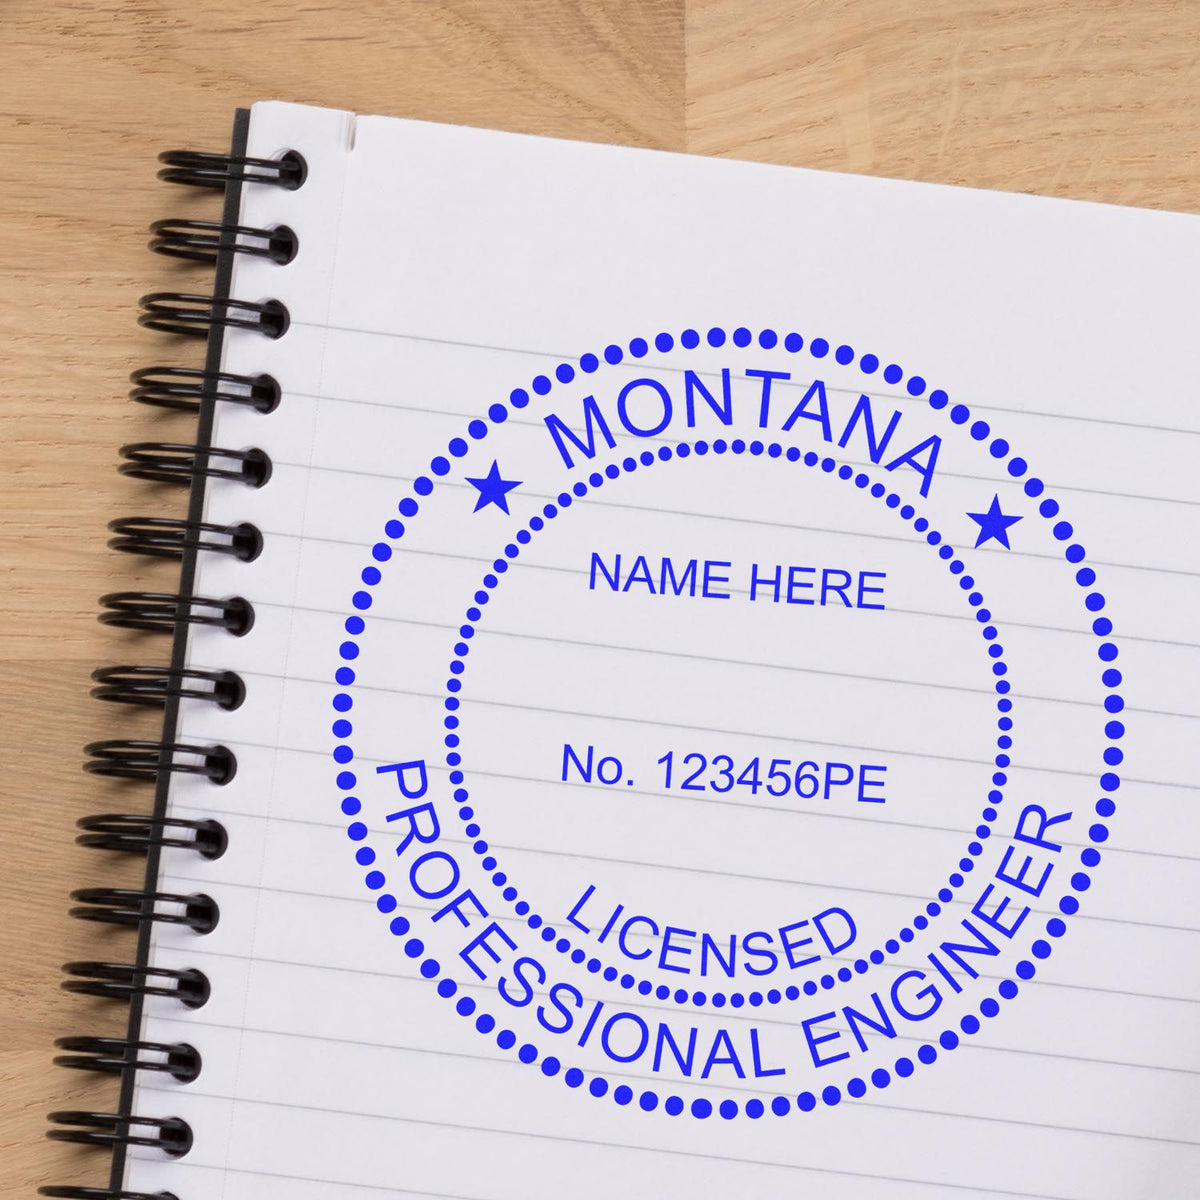 The Self-Inking Montana PE Stamp stamp impression comes to life with a crisp, detailed photo on paper - showcasing true professional quality.